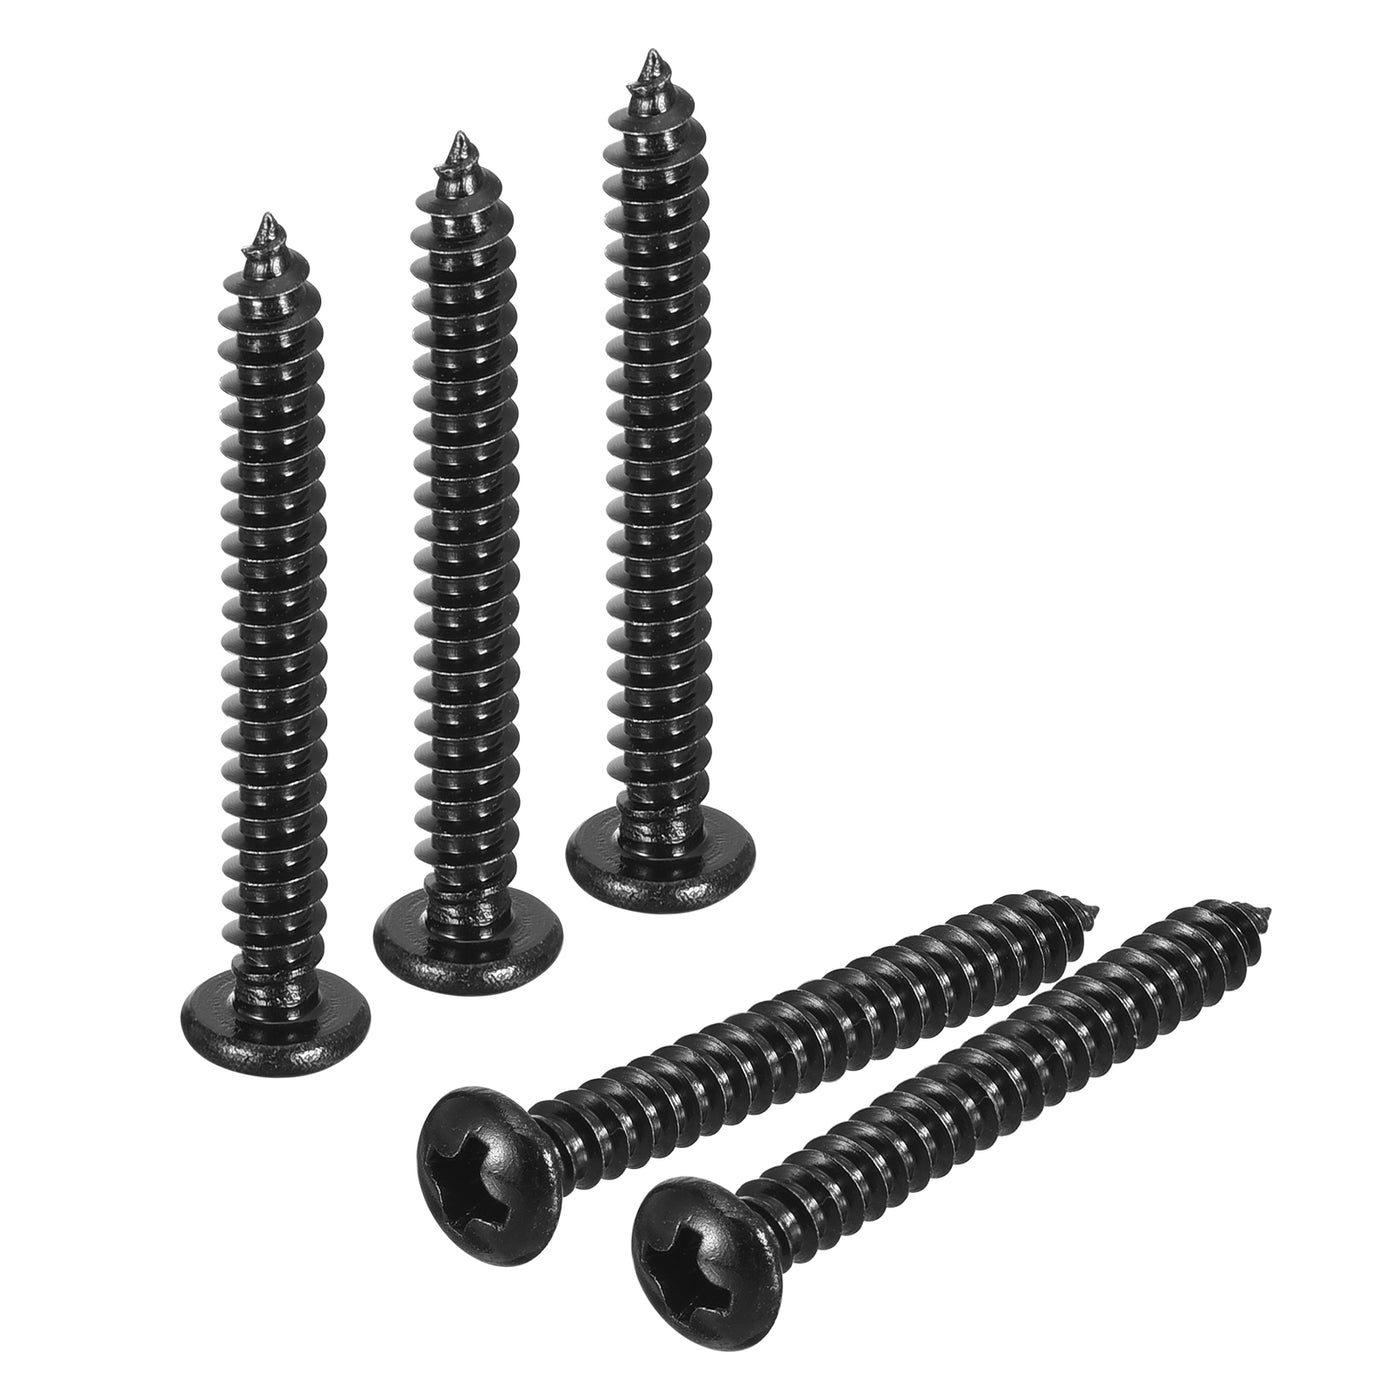 uxcell Uxcell #8 x 1-3/8" Phillips Pan Head Self-tapping Screw, 100pcs - 304 Stainless Steel Round Head Wood Screw Full Thread (Black)